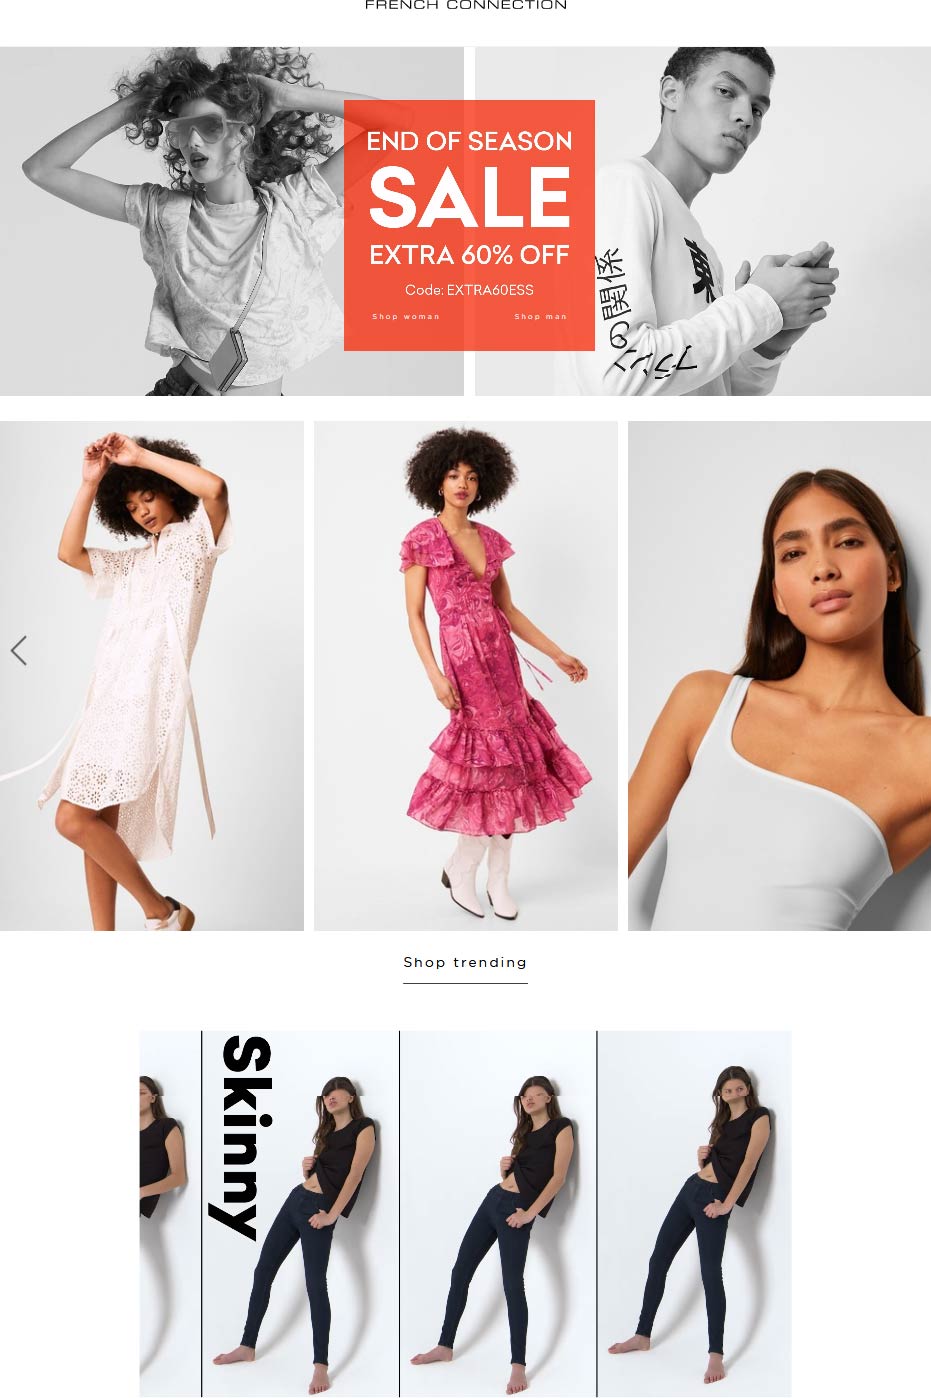 French Connection stores Coupon  Extra 60% off at French Connection #frenchconnection 